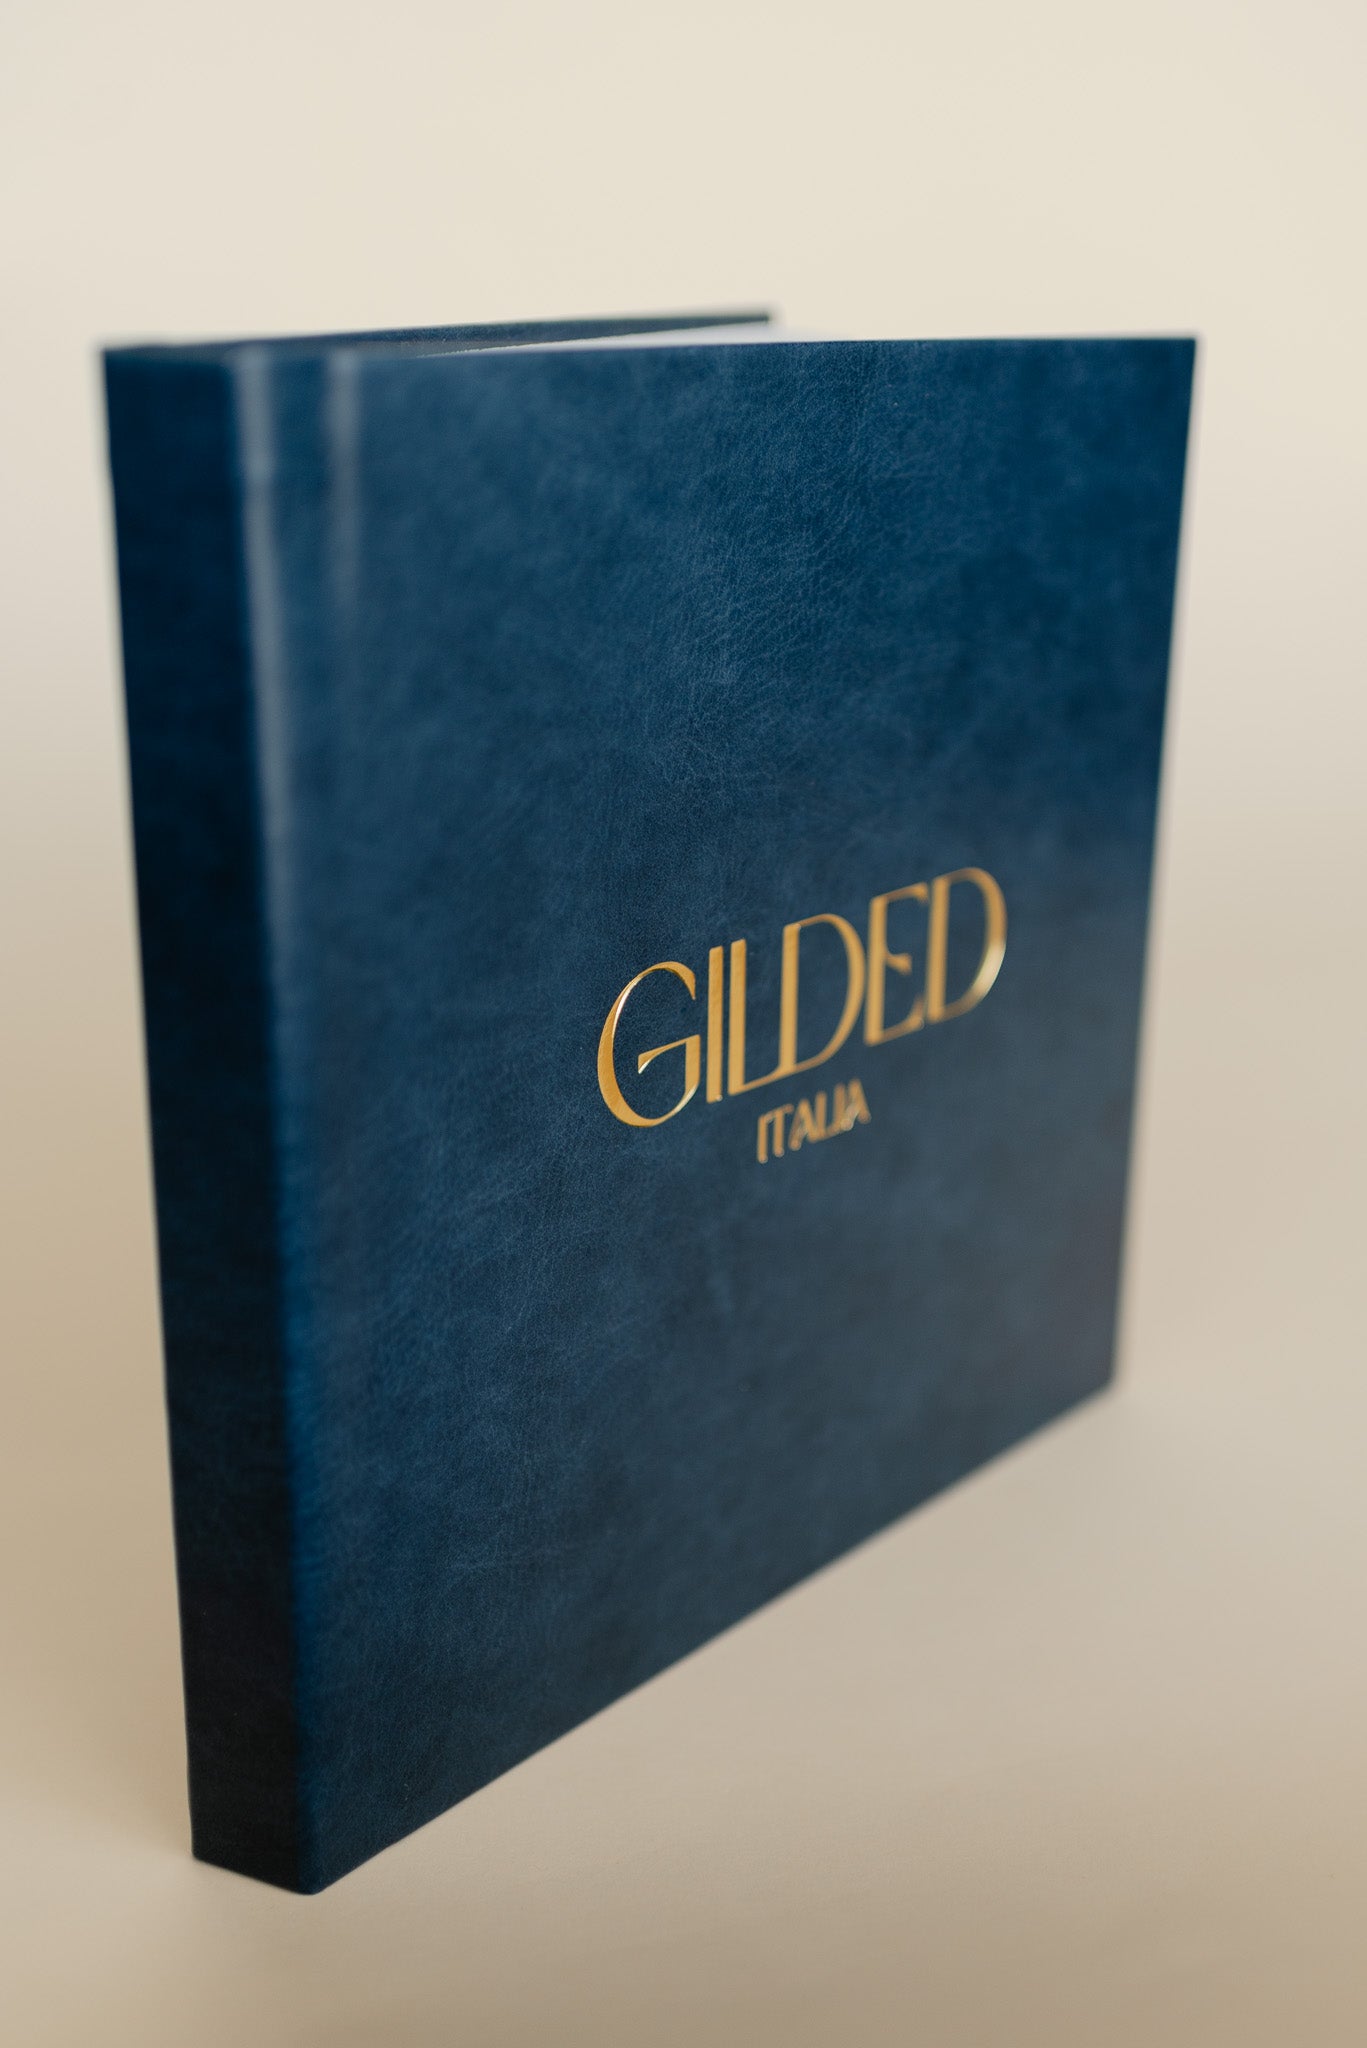 Gilded Italia: Timeless Moments from Venice to Rome